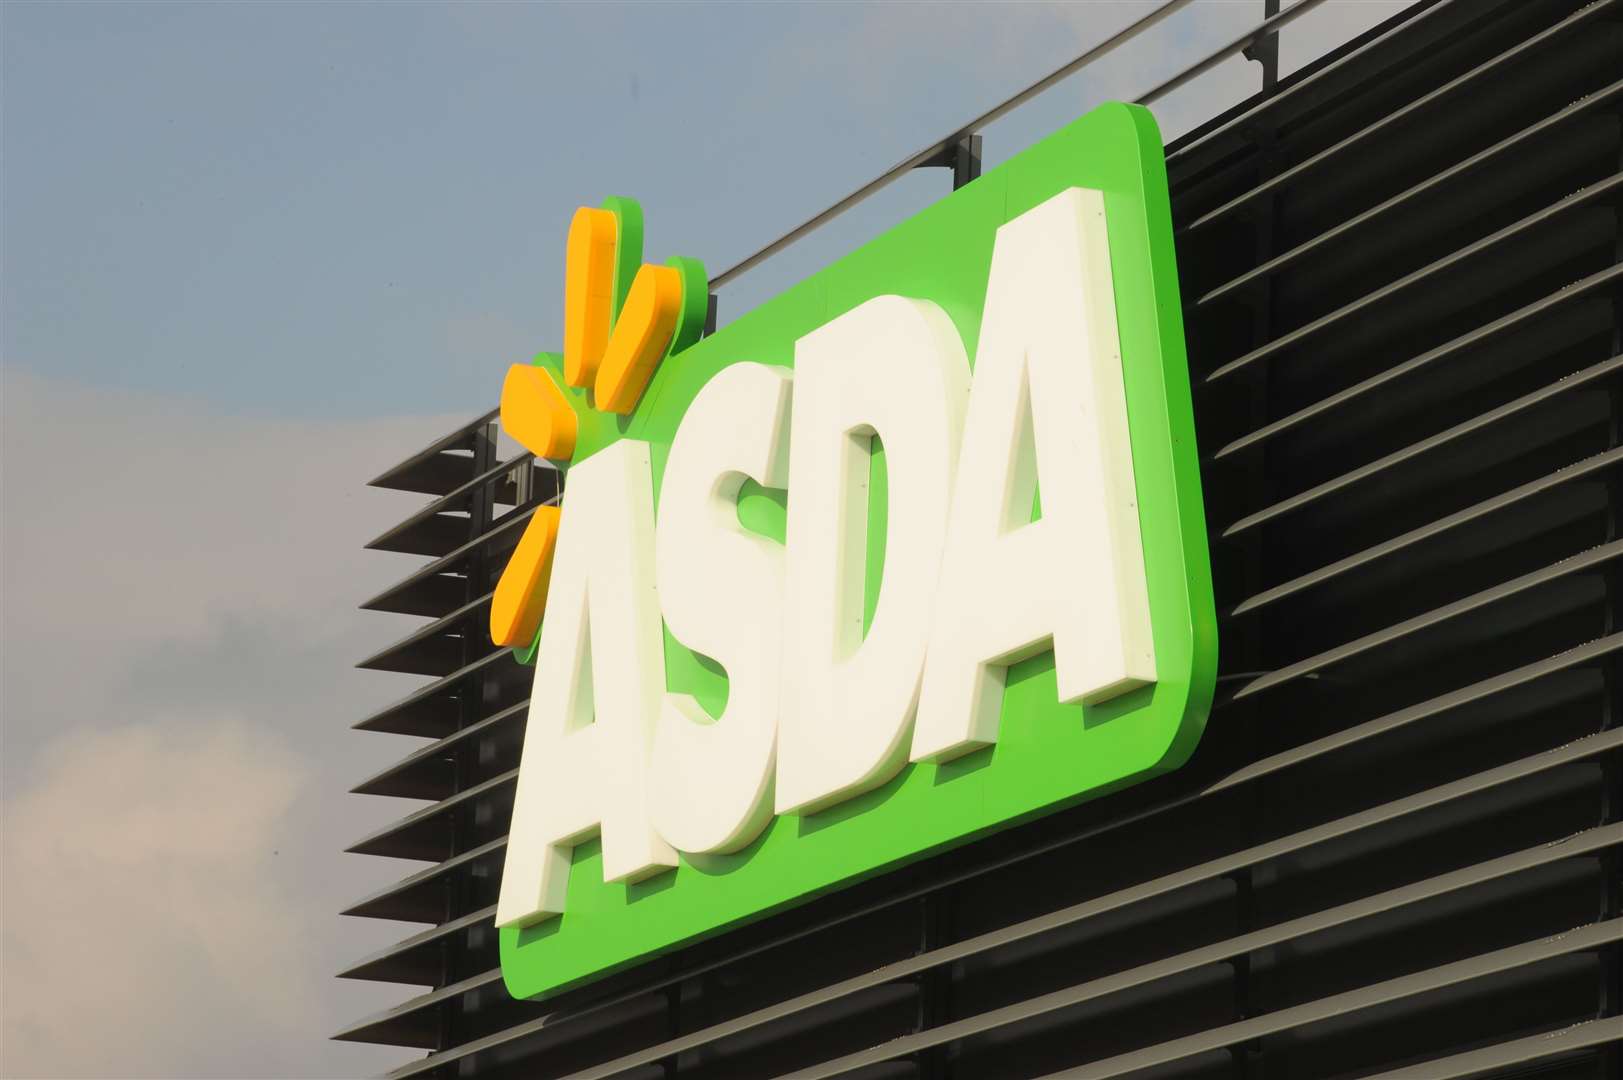 Asda has a store opposite the site in Pier Road